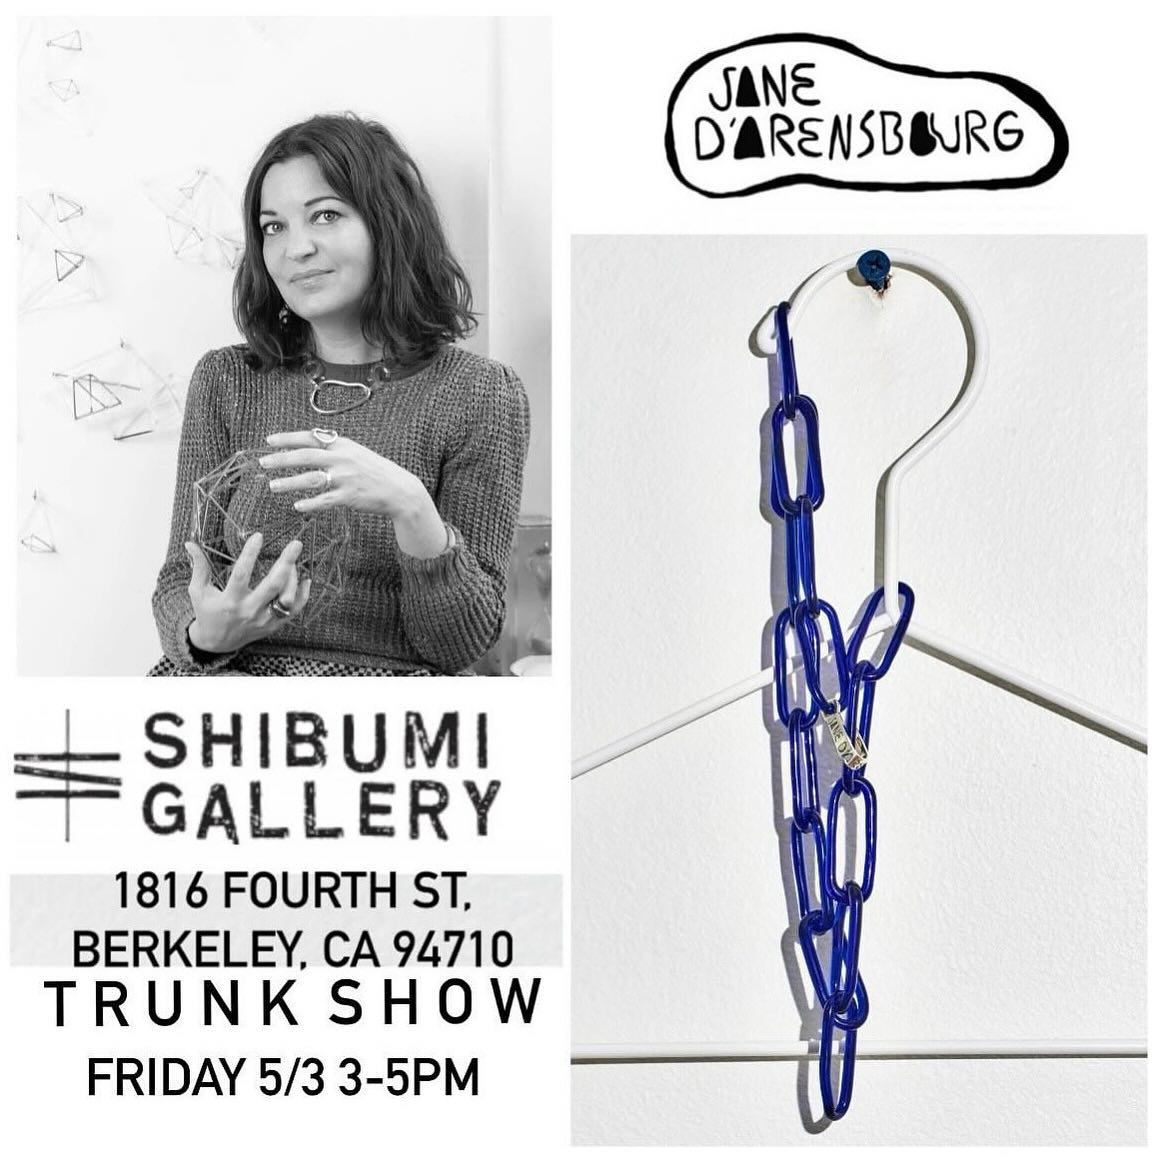 Today only! Jewelry artist @janedarensbourg is in town from NYC and joining us for a Trunk Show! Her pieces marry colorful glass and precious metals ~ shop the selection all day and meet the artist from 3-5 PM. 

#shibumigallery #fourthstreetshops #s